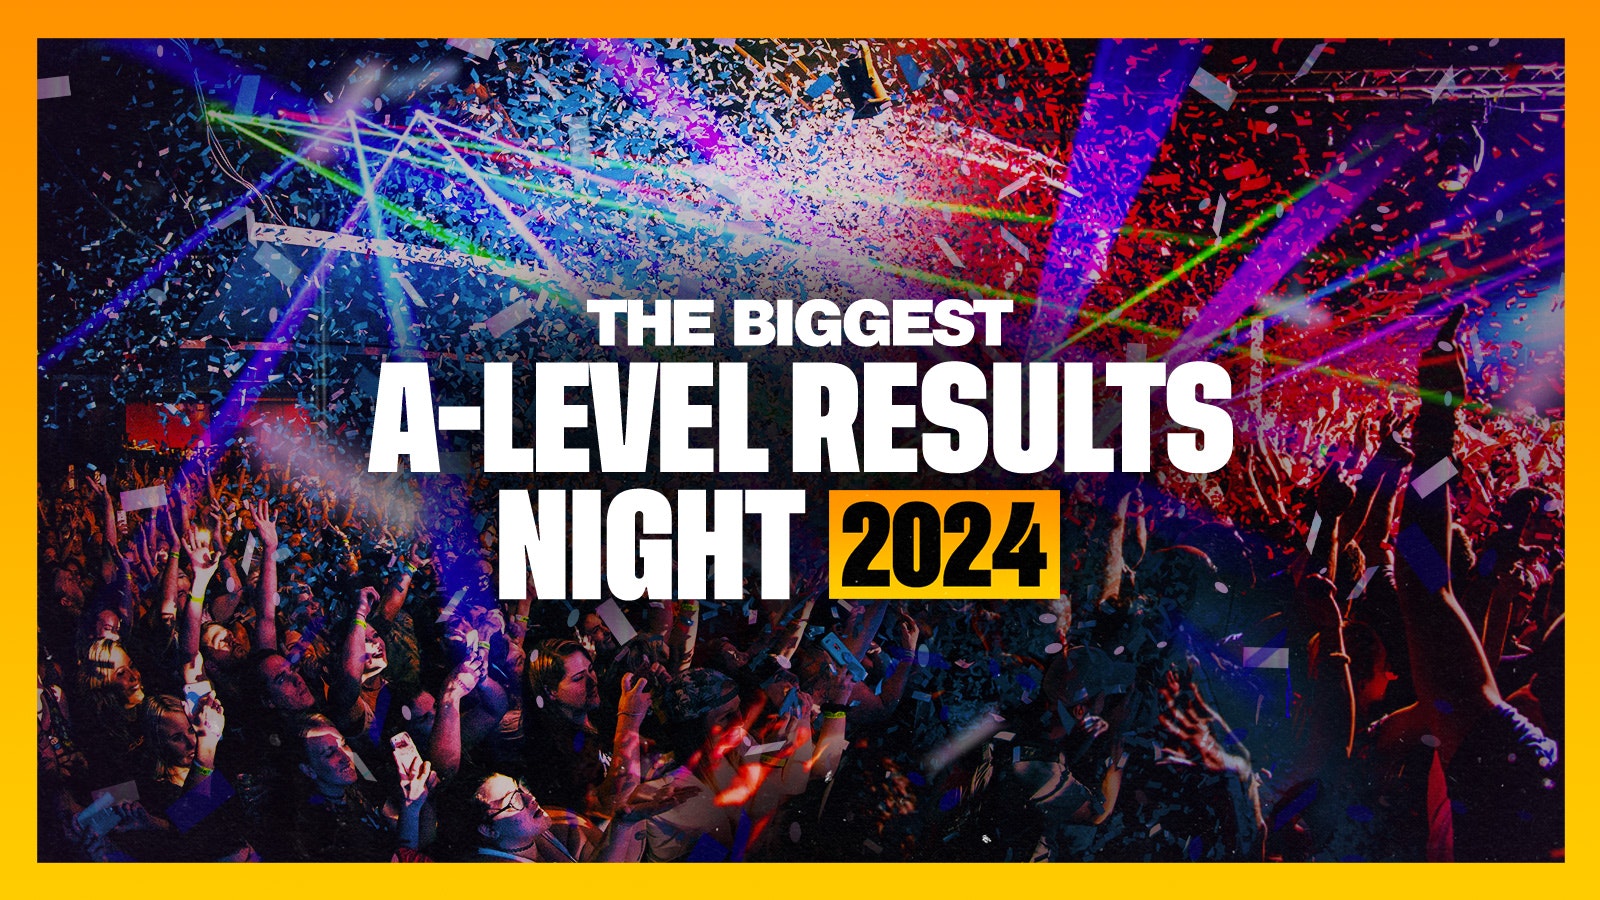 Cambridge A Level Results Night 2024 – SIGN UP FOR FREE NOW!